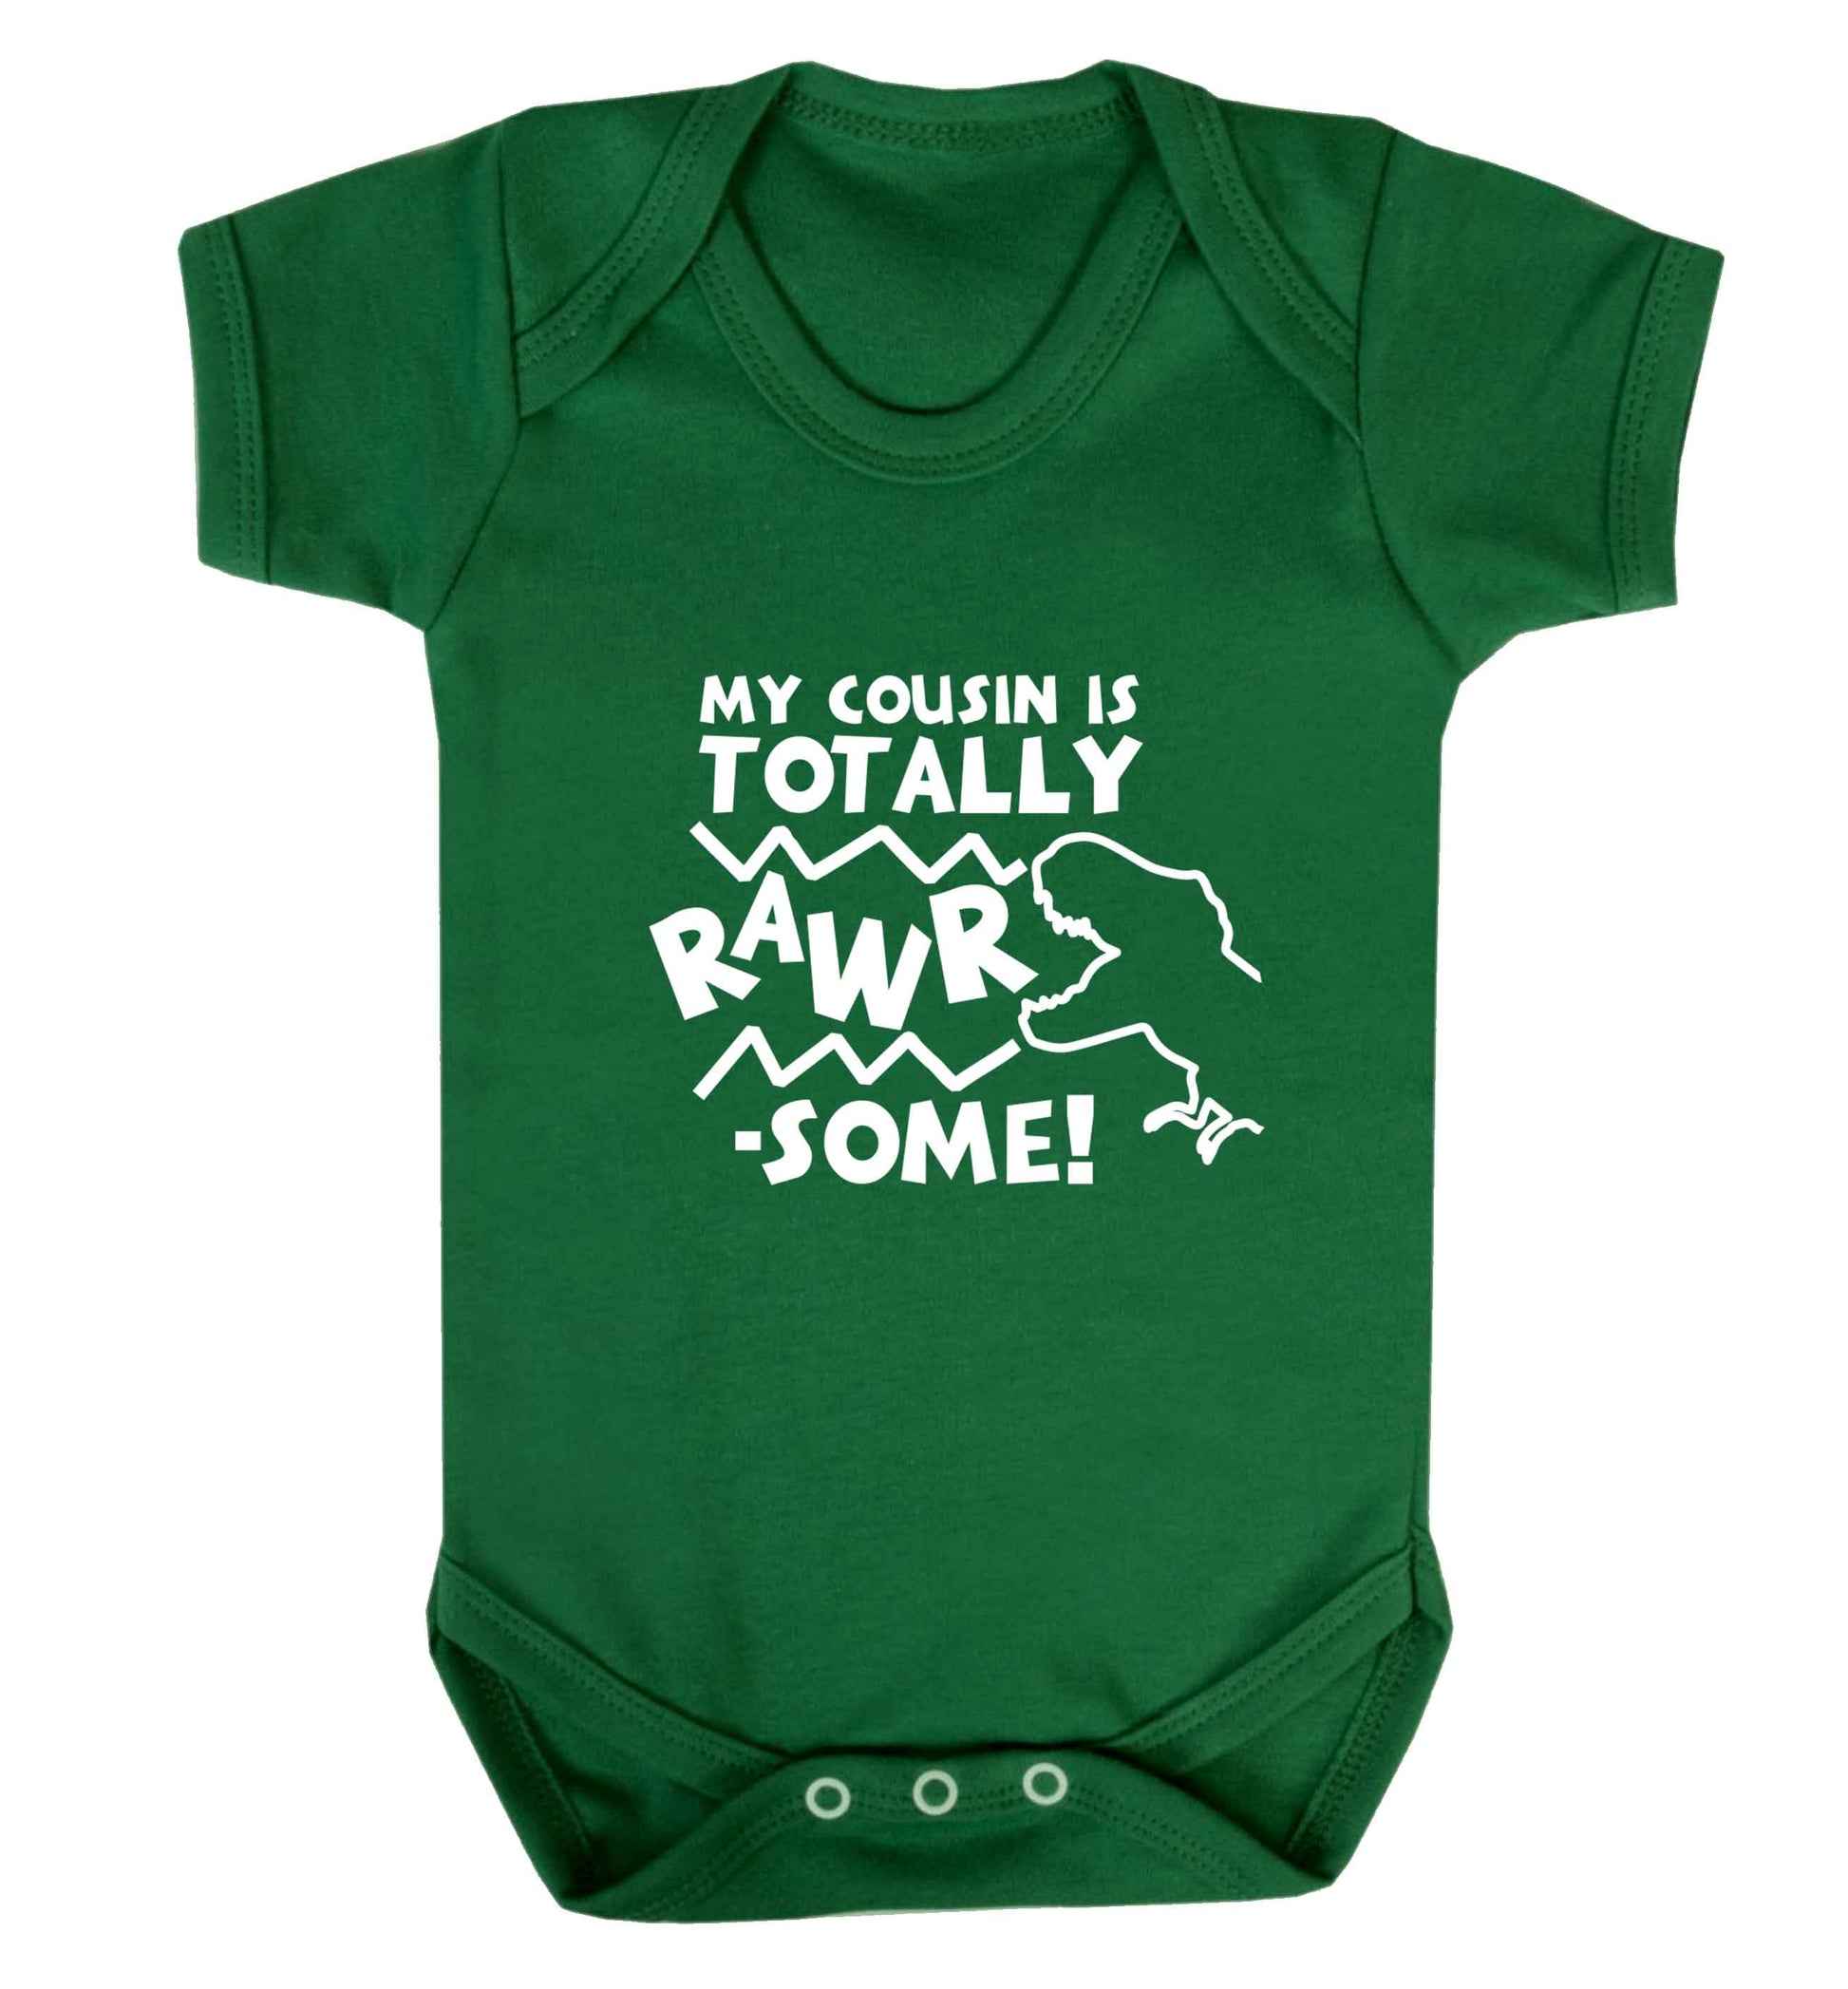 My cousin is totally rawrsome baby vest green 18-24 months